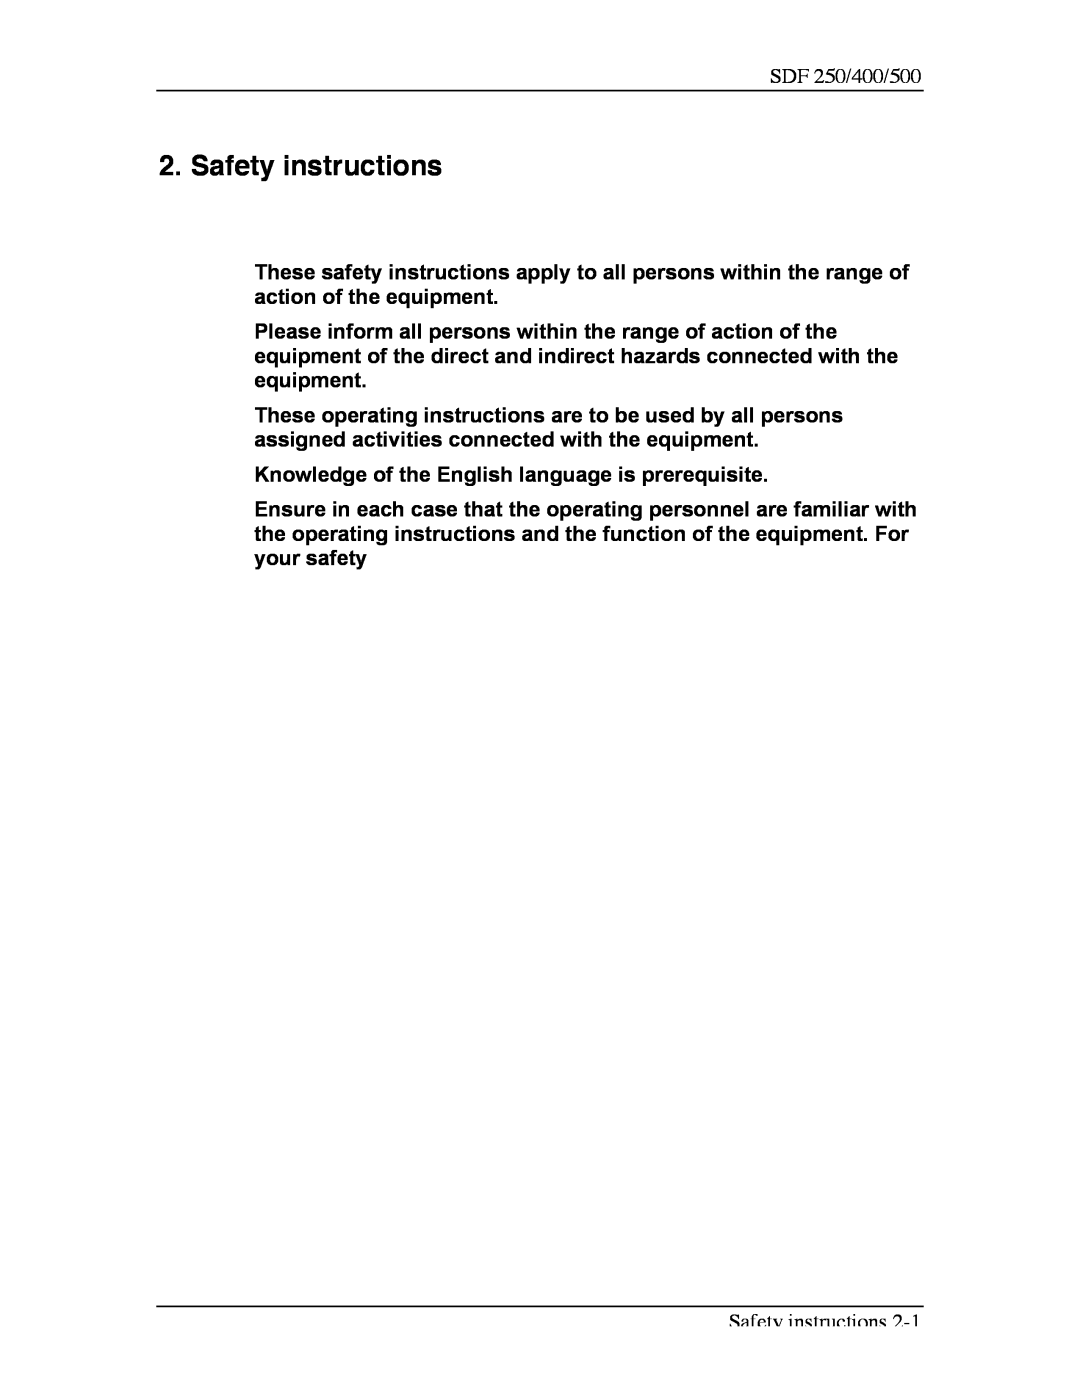 Sterling SDF 250, SDF 400, SDF 500 manual Safety instructions 